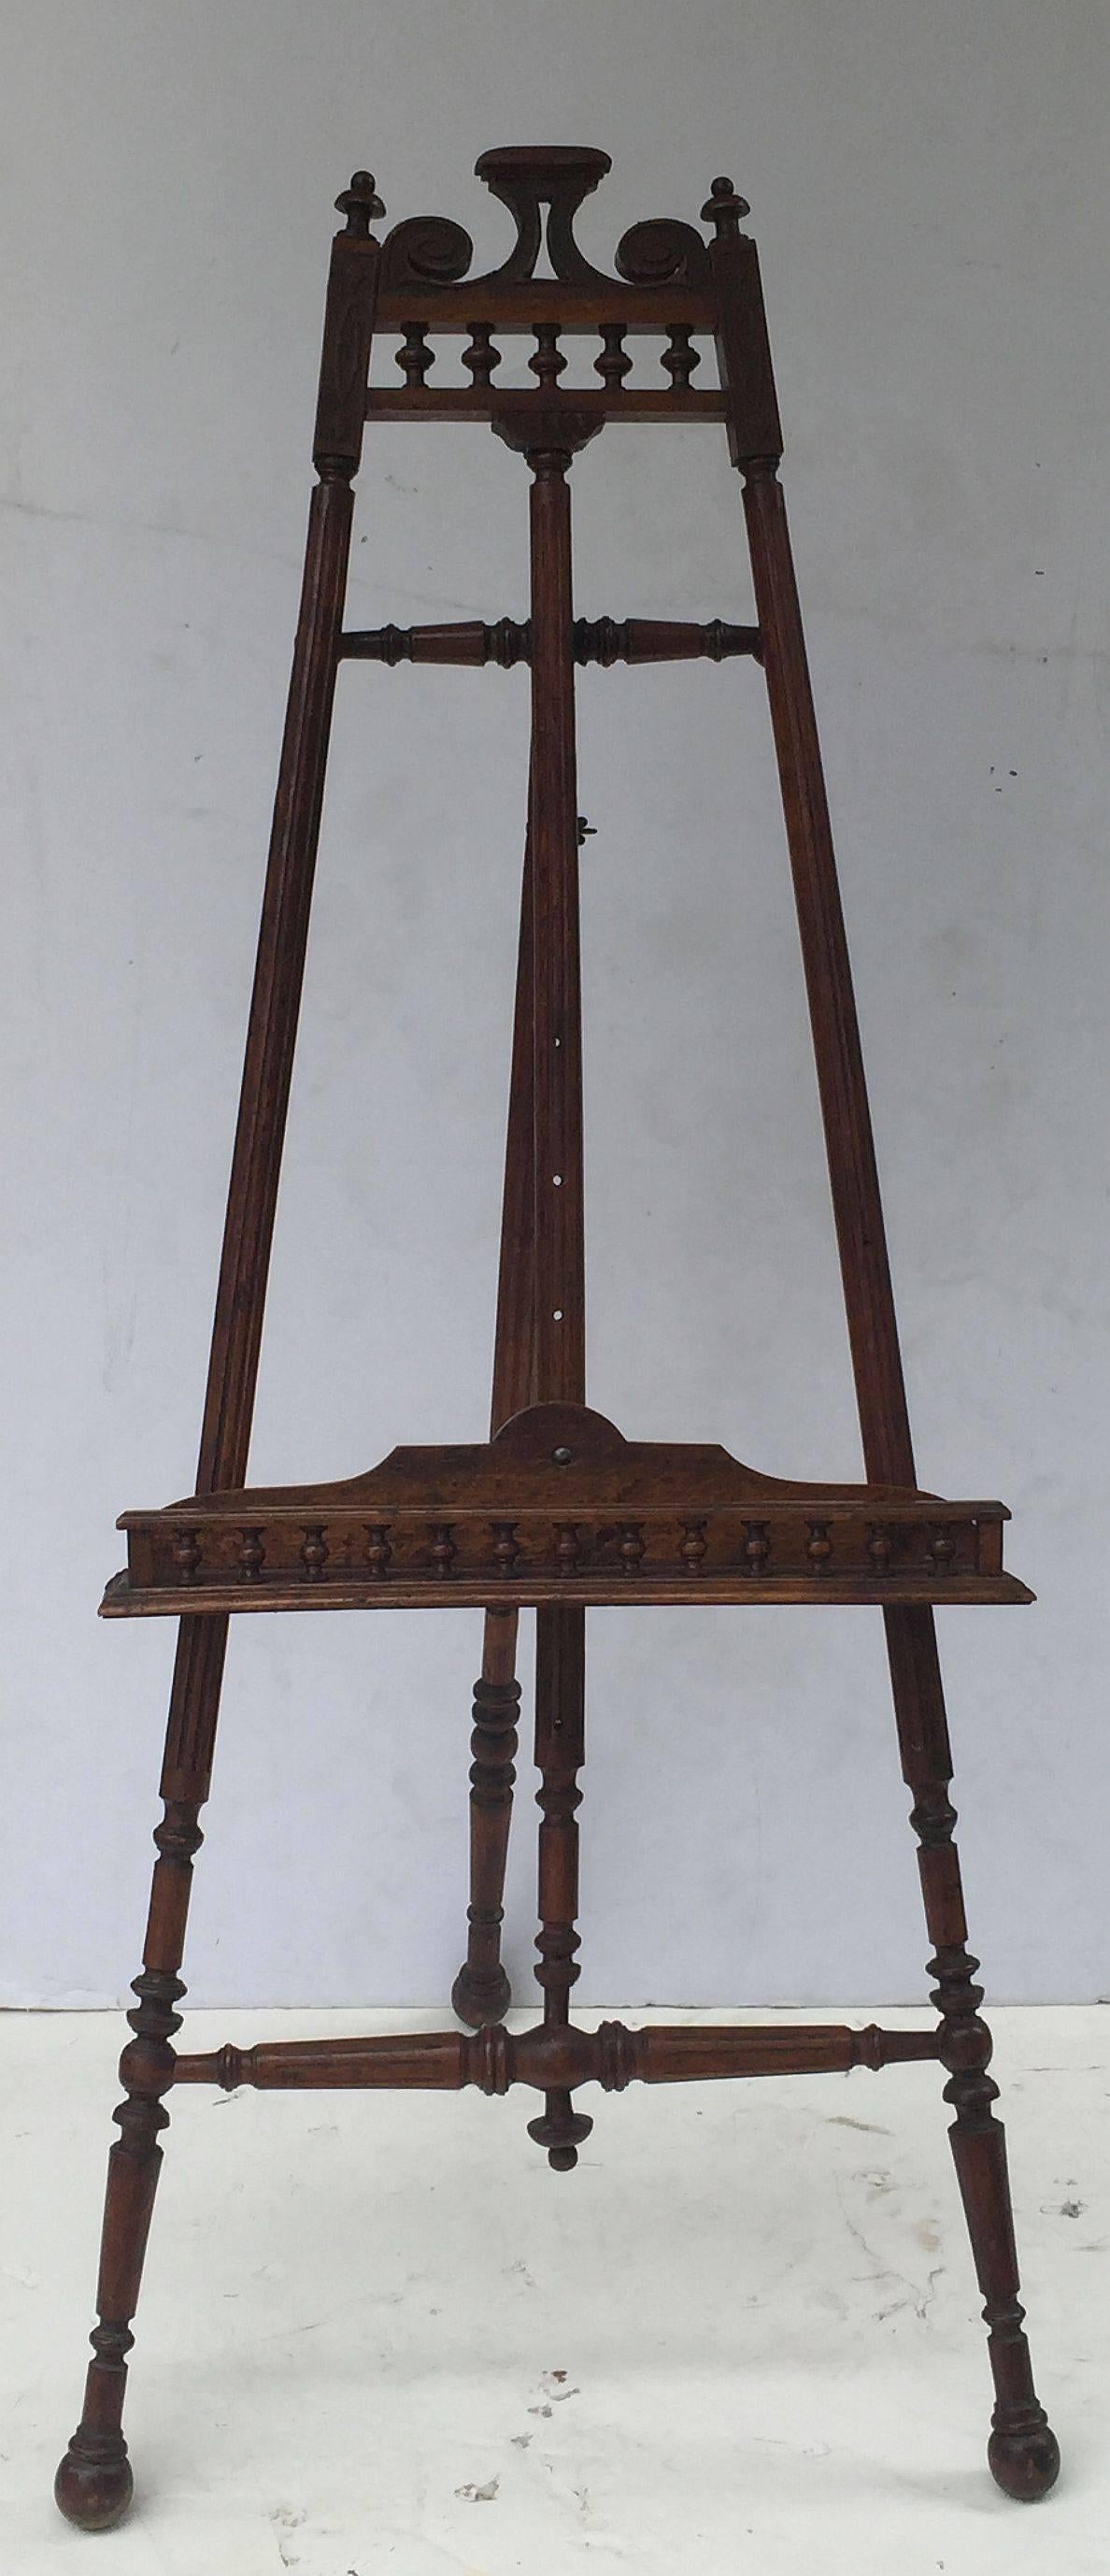 A handsome French display easel of oak, featuring a decorative top rail with a design of scrolls and turned spindles, adjustable canvas holder and tray with turned spindle gallery, and adjustable reeded support rails of turned wood and brass.